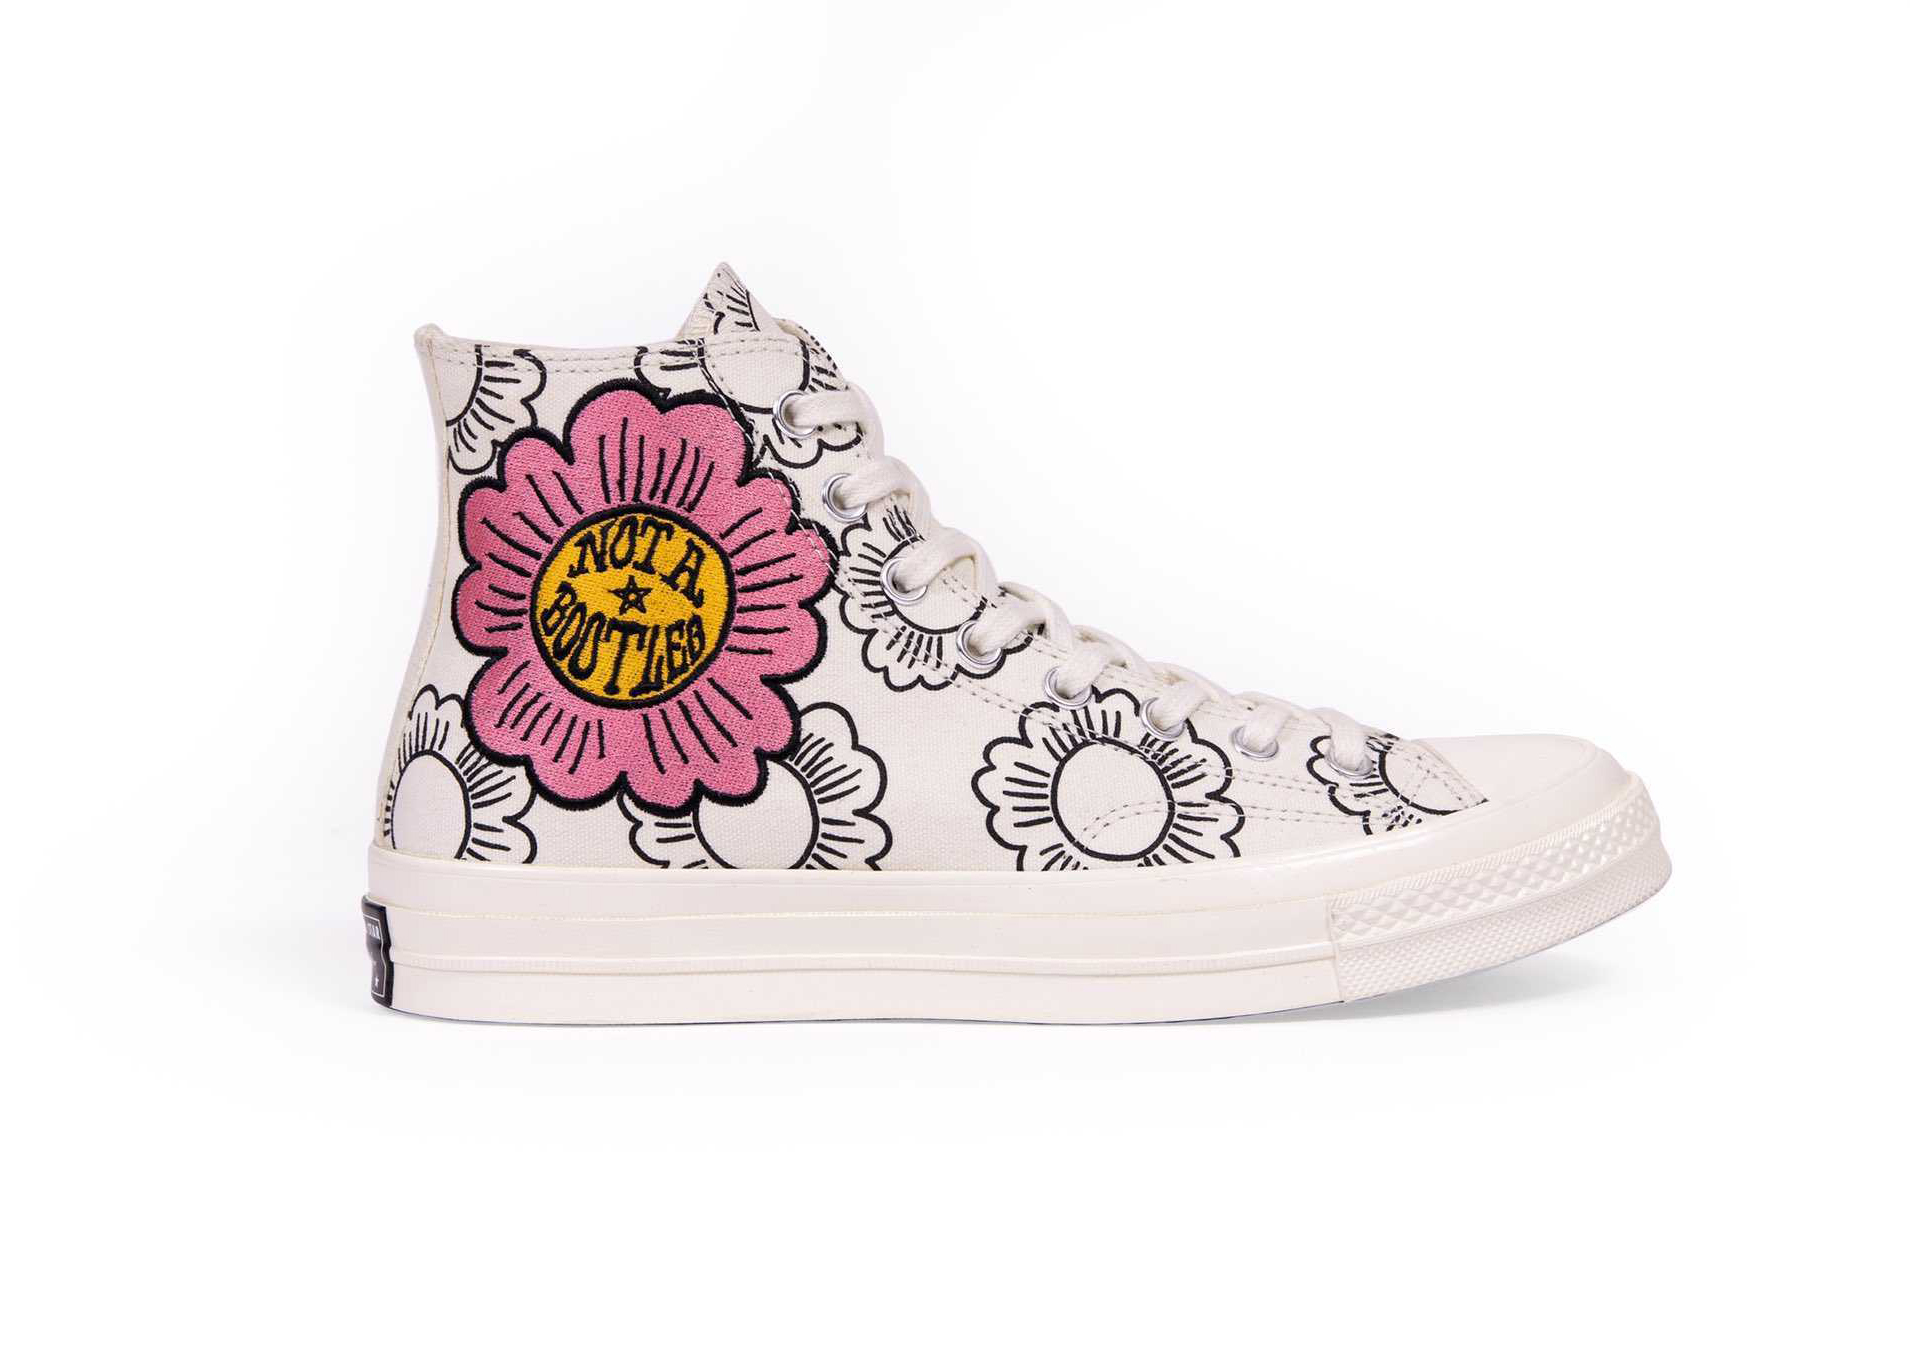 Pre-owned Converse Chuck Taylor All-star 70 Hi Joe Freshgoods This Is Not A Bootleg (f&f) In Egret/pink/black